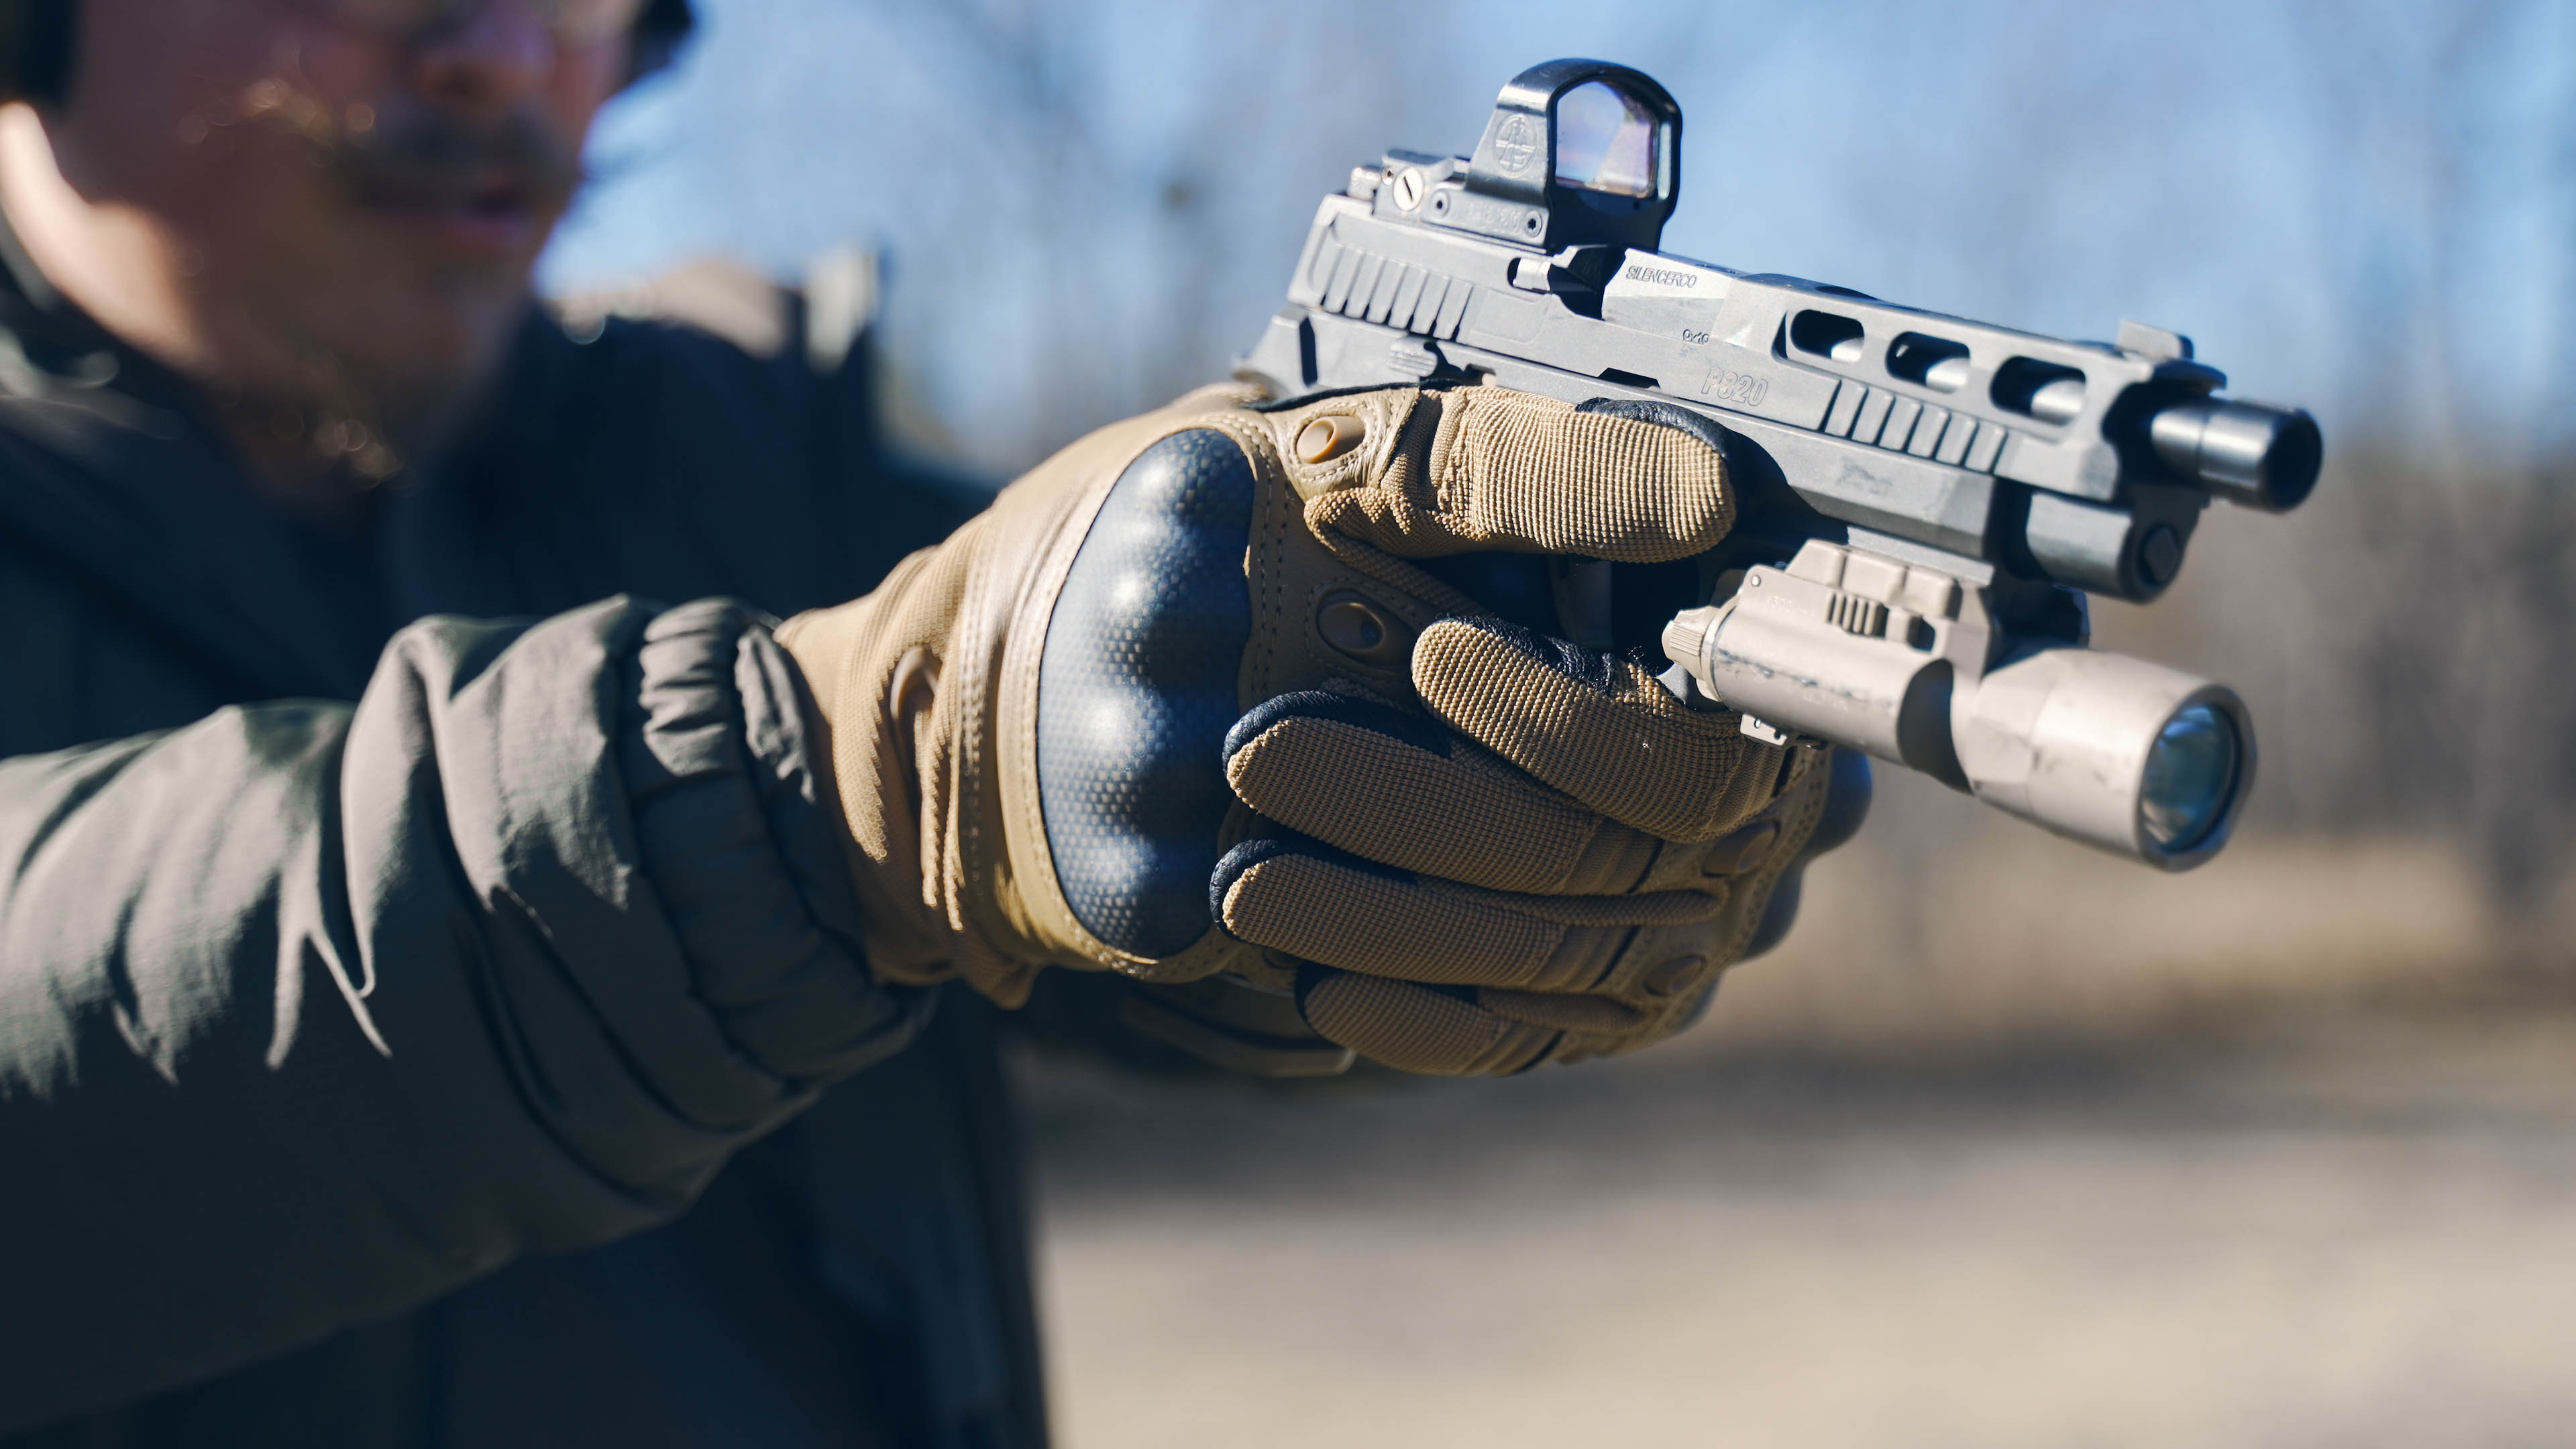 The 9 Best Tactical Gloves, Tested and Reviewed